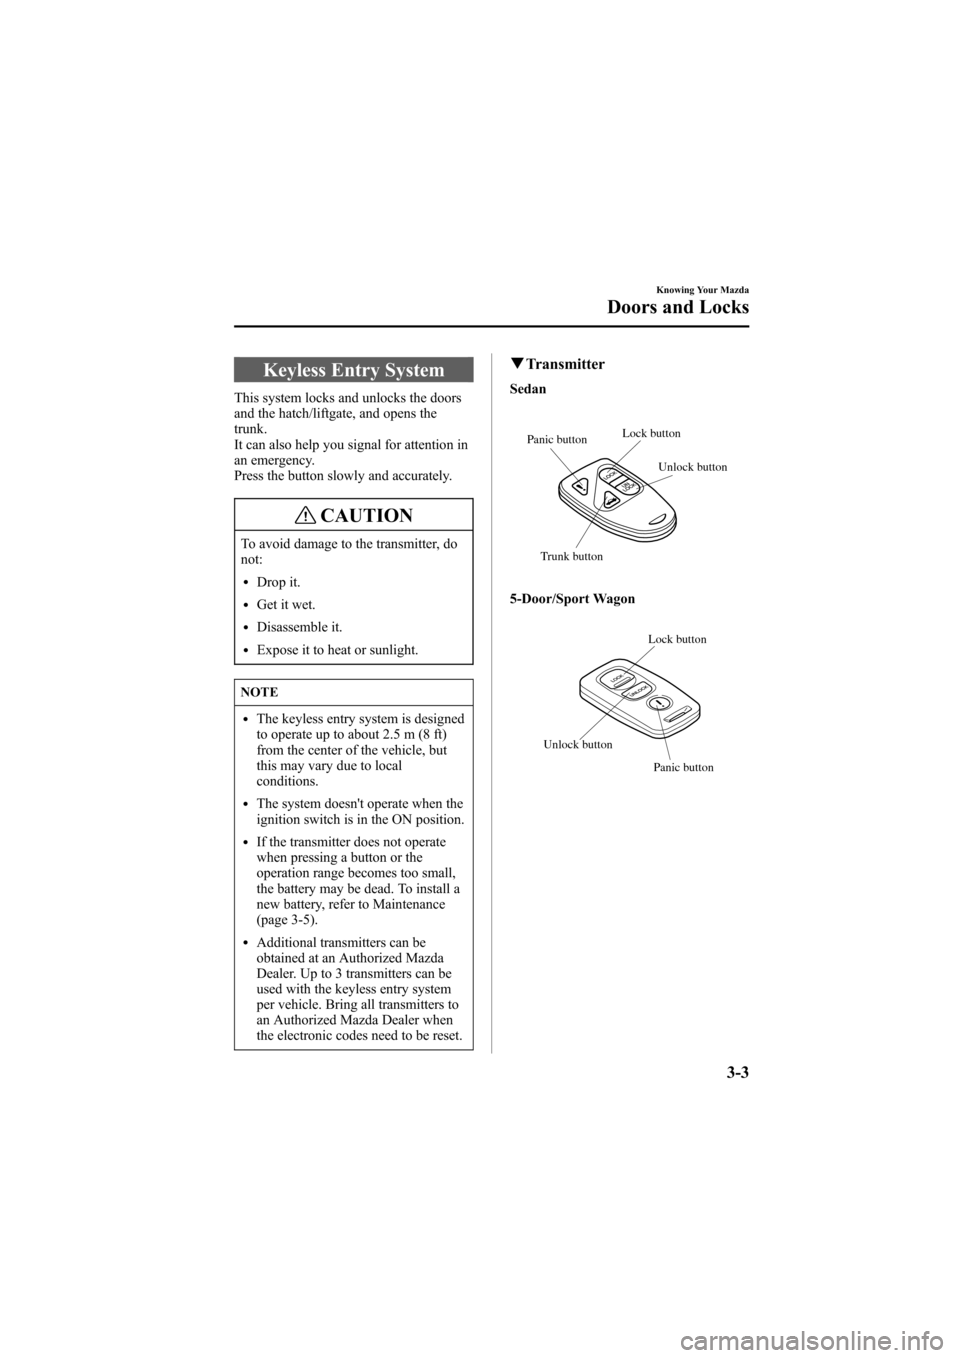 MAZDA MODEL 6 2005   (in English) Manual PDF Black plate (79,1)
Keyless Entry System
This system locks and unlocks the doors
and the hatch/liftgate, and opens the
trunk.
It can also help you signal for attention in
an emergency.
Press the button